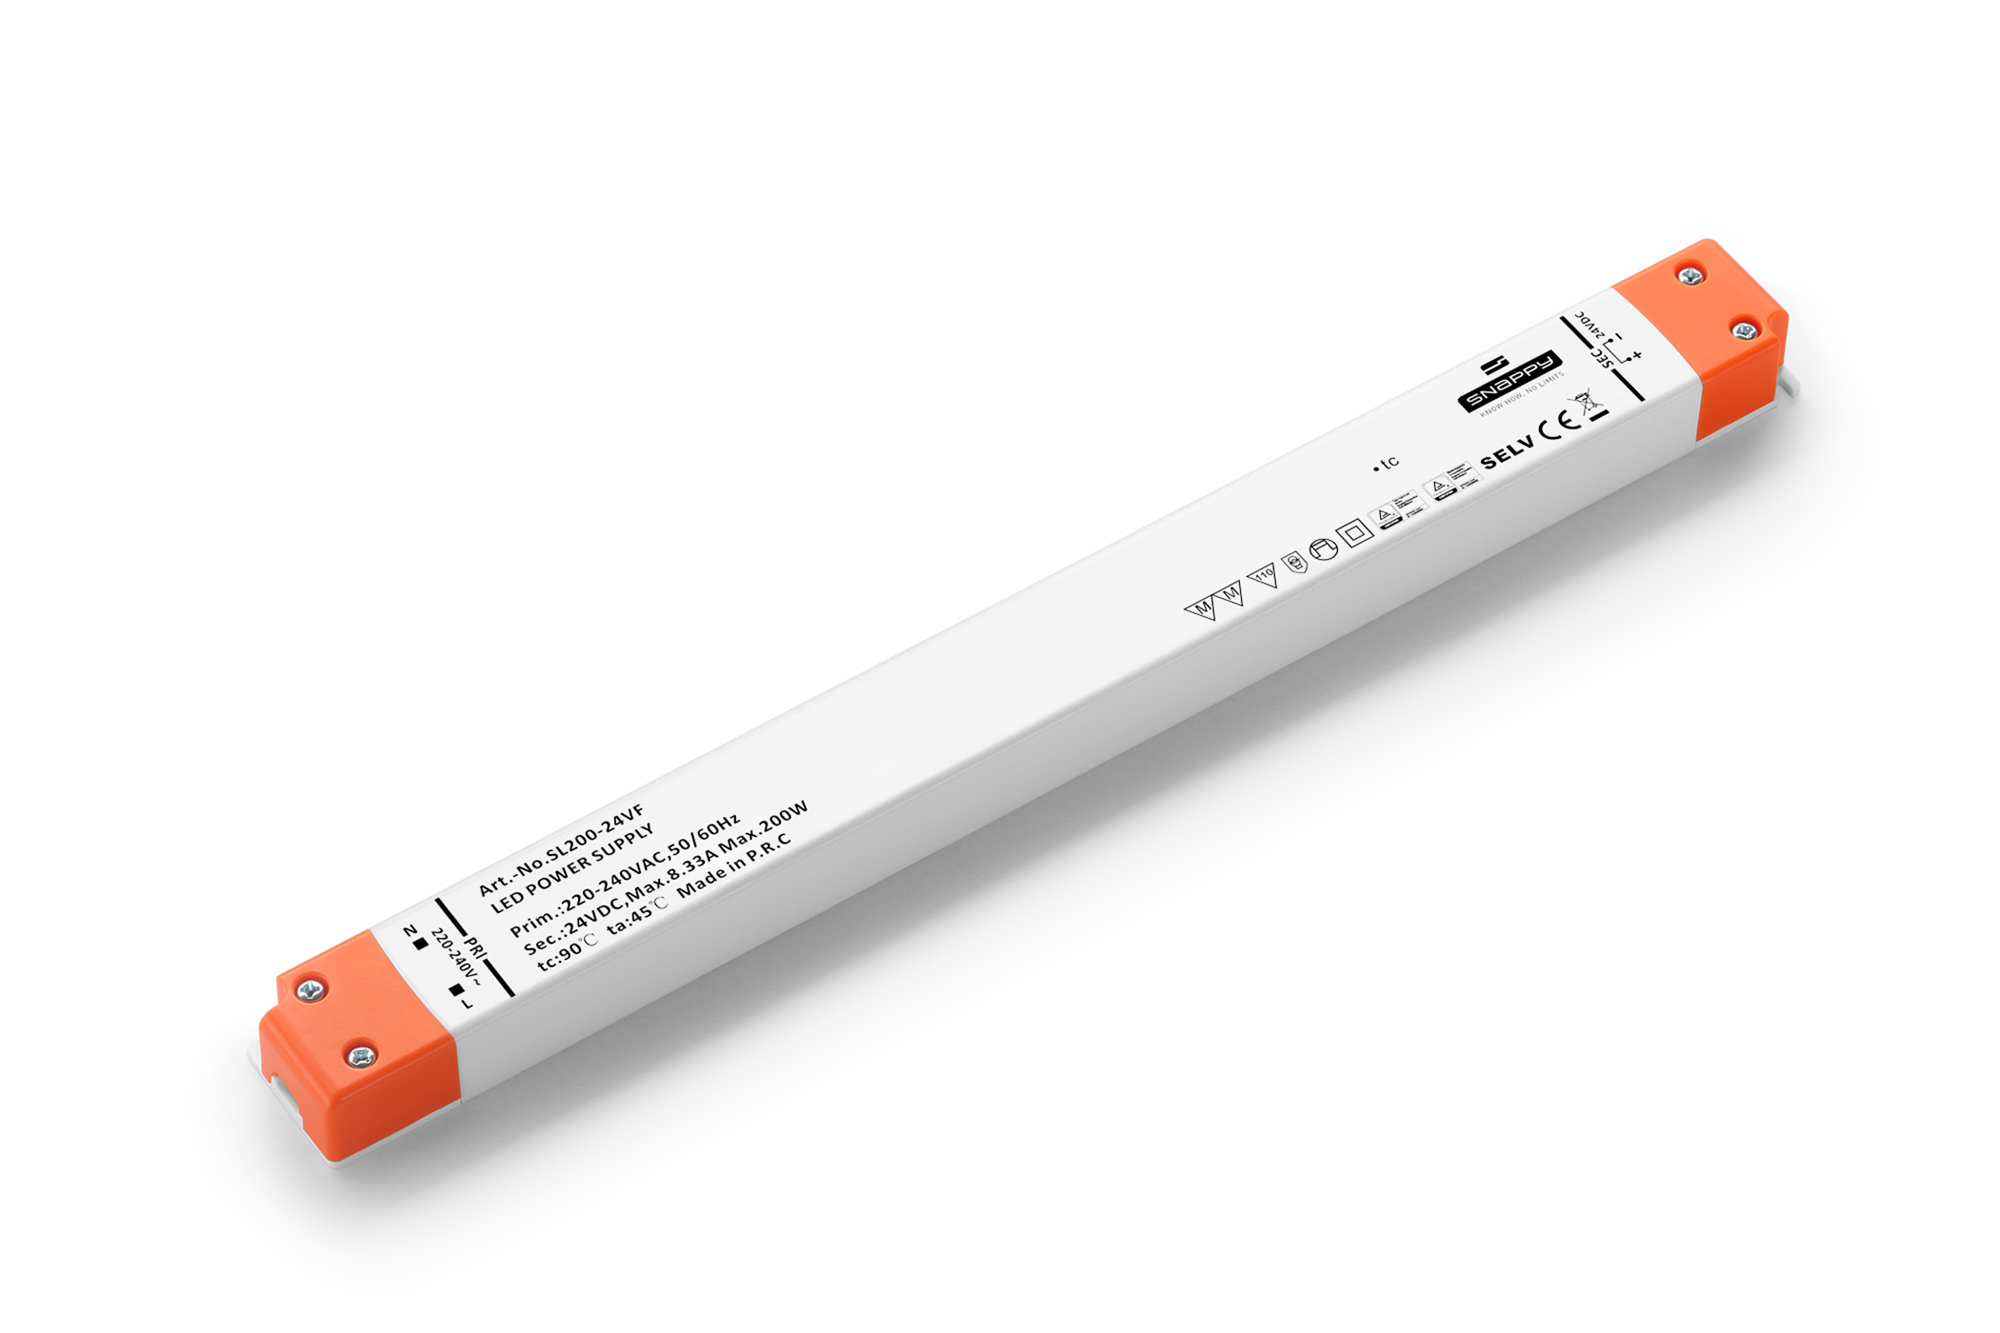 SL200-24VF  200W; Constant Voltage Non Dimmable LED Driver; 24VDC; 8.33A; Input 200-240VAC 50/60Hz; IP20.